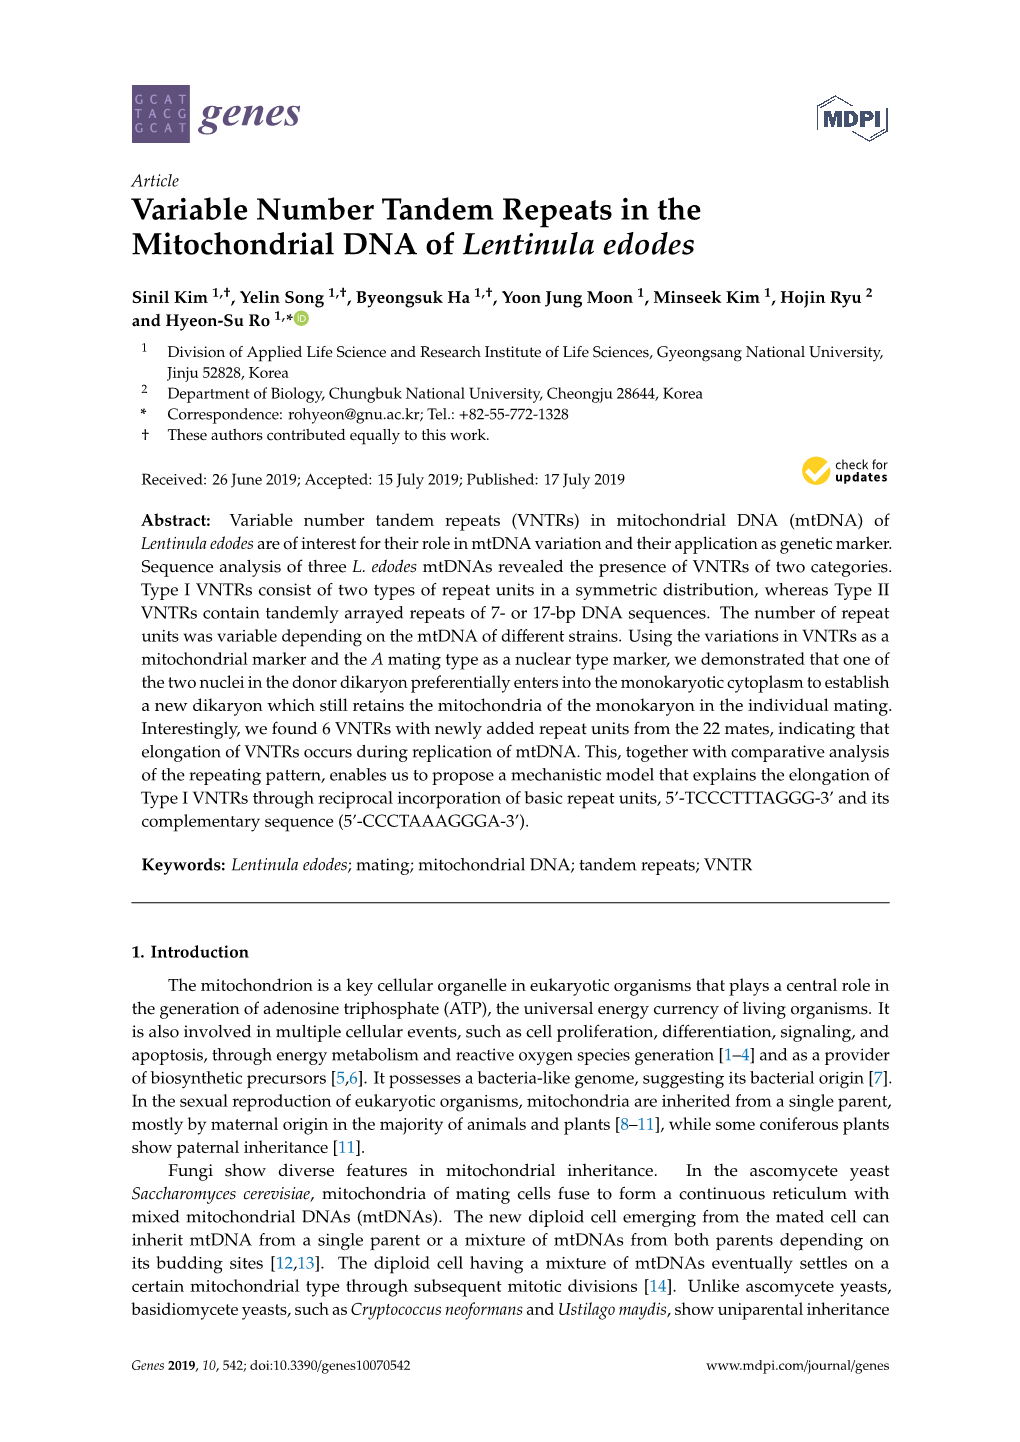 Variable Number Tandem Repeats in the Mitochondrial DNA of Lentinula Edodes